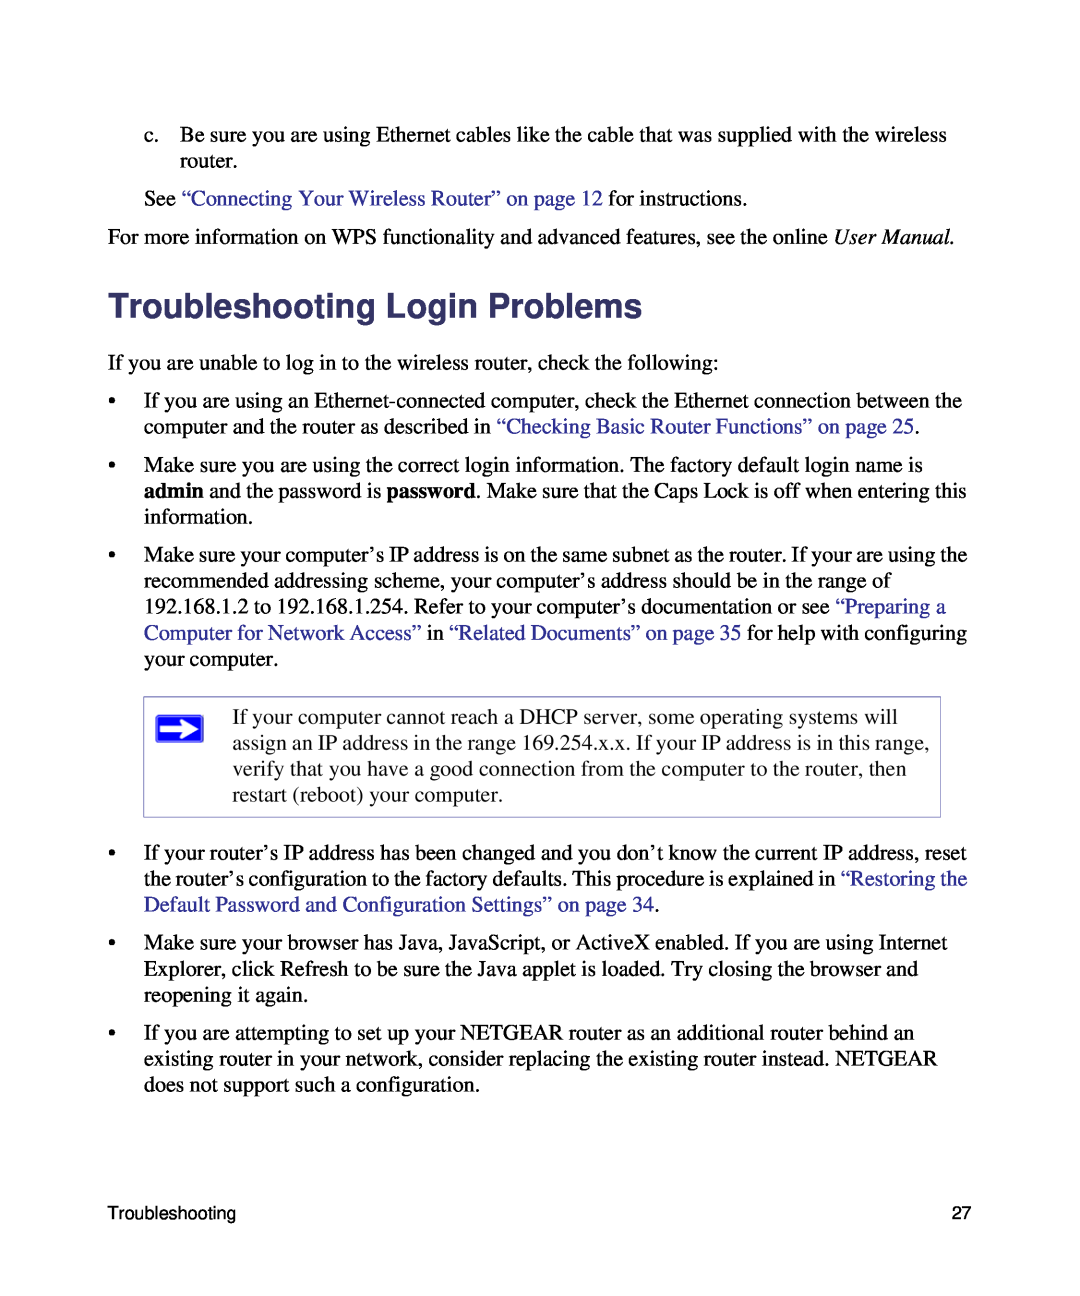 NETGEAR WNR1000, N150 Troubleshooting Login Problems, See “Connecting Your Wireless Router” on page 12 for instructions 